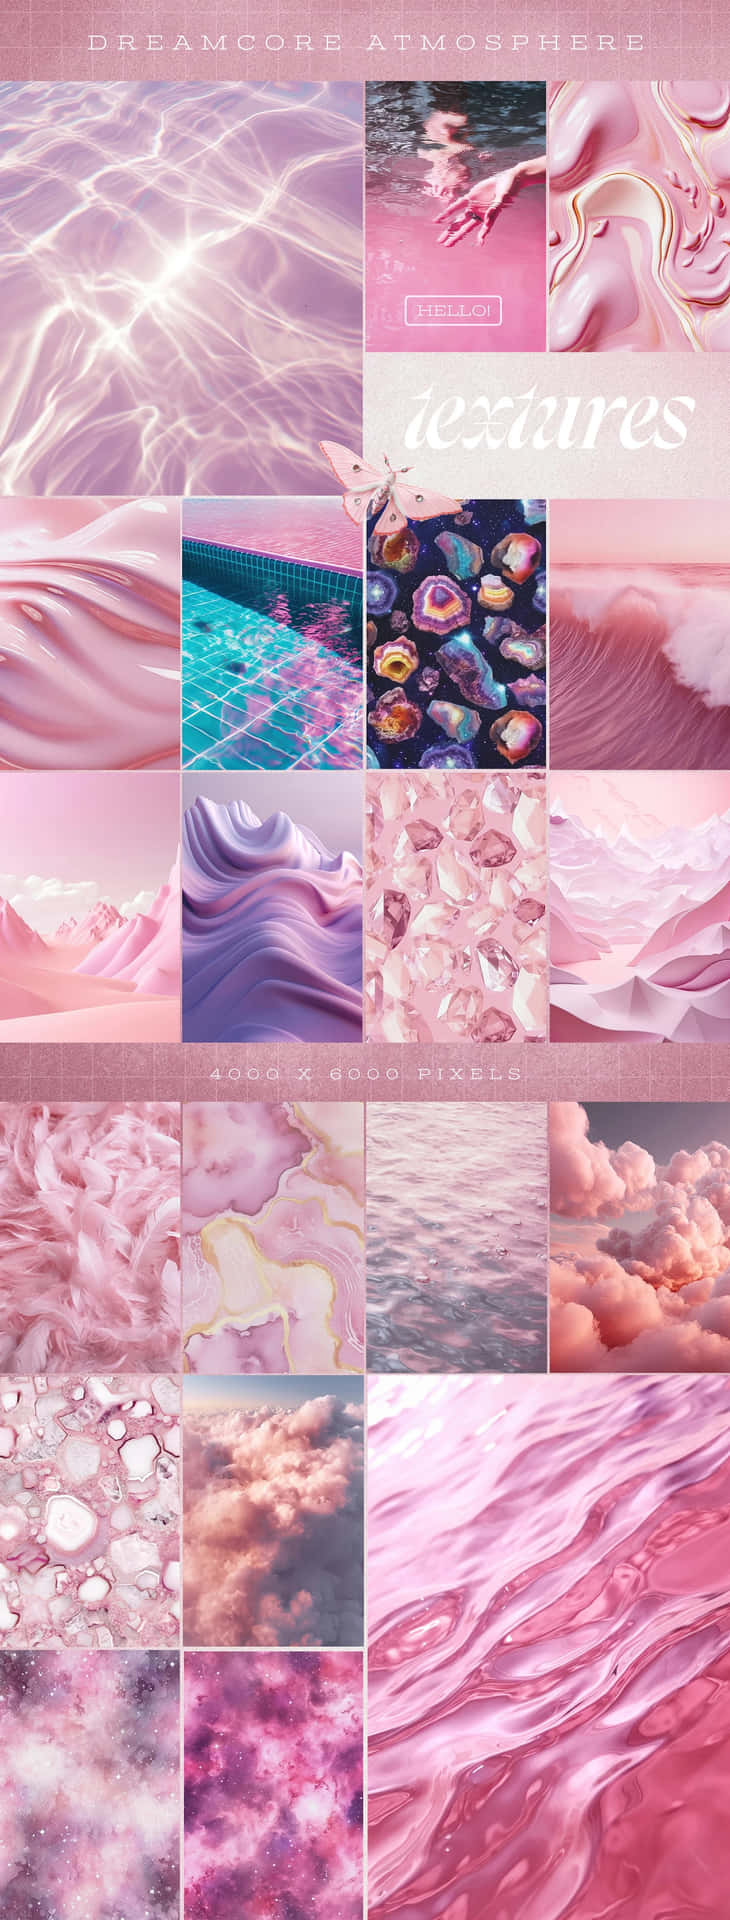 Dreamcore Aesthetic Collage Wallpaper